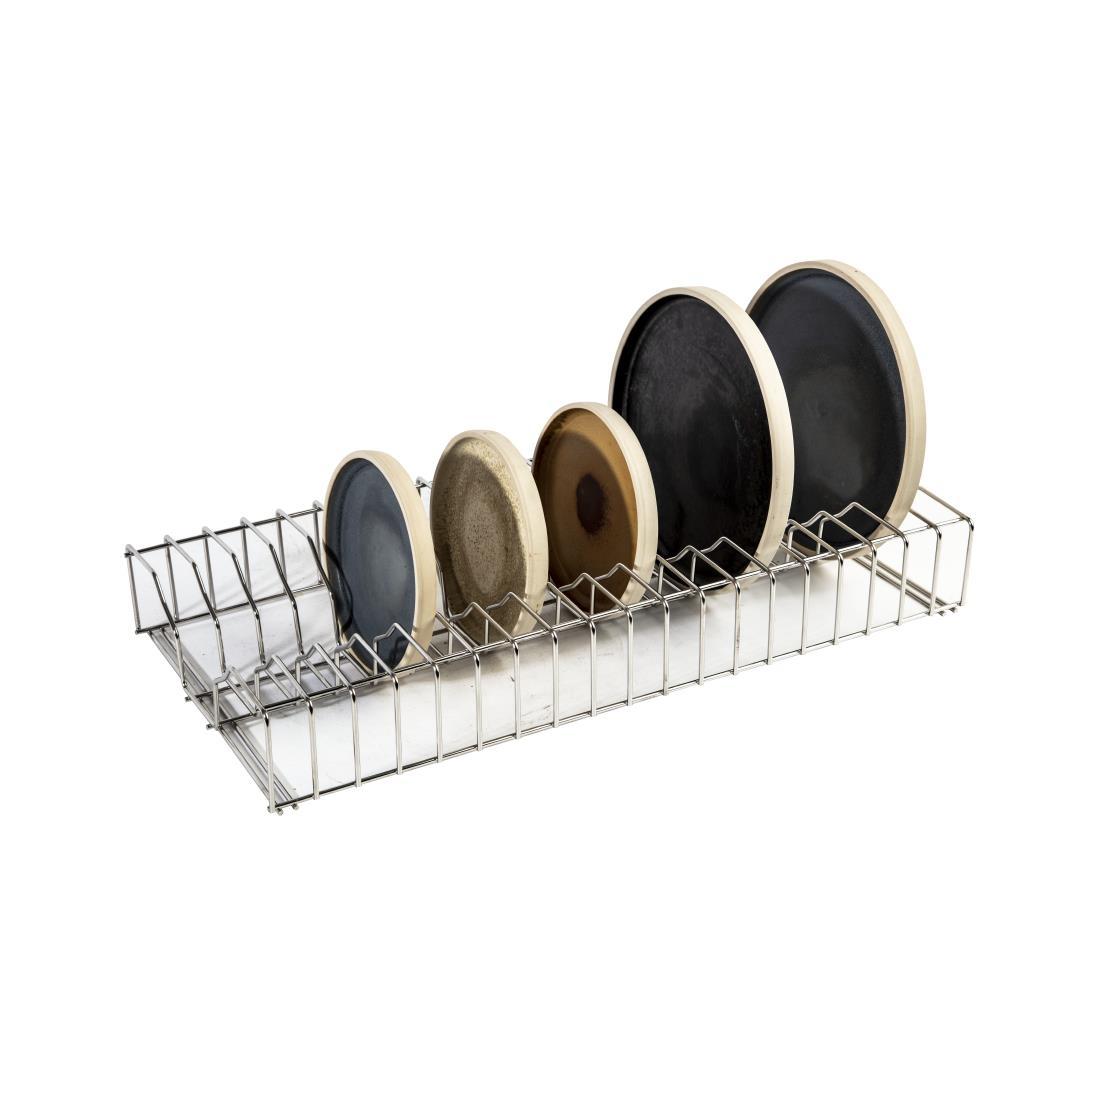 Vogue Stainless Steel Plate Racks 600mm - L440  - 3